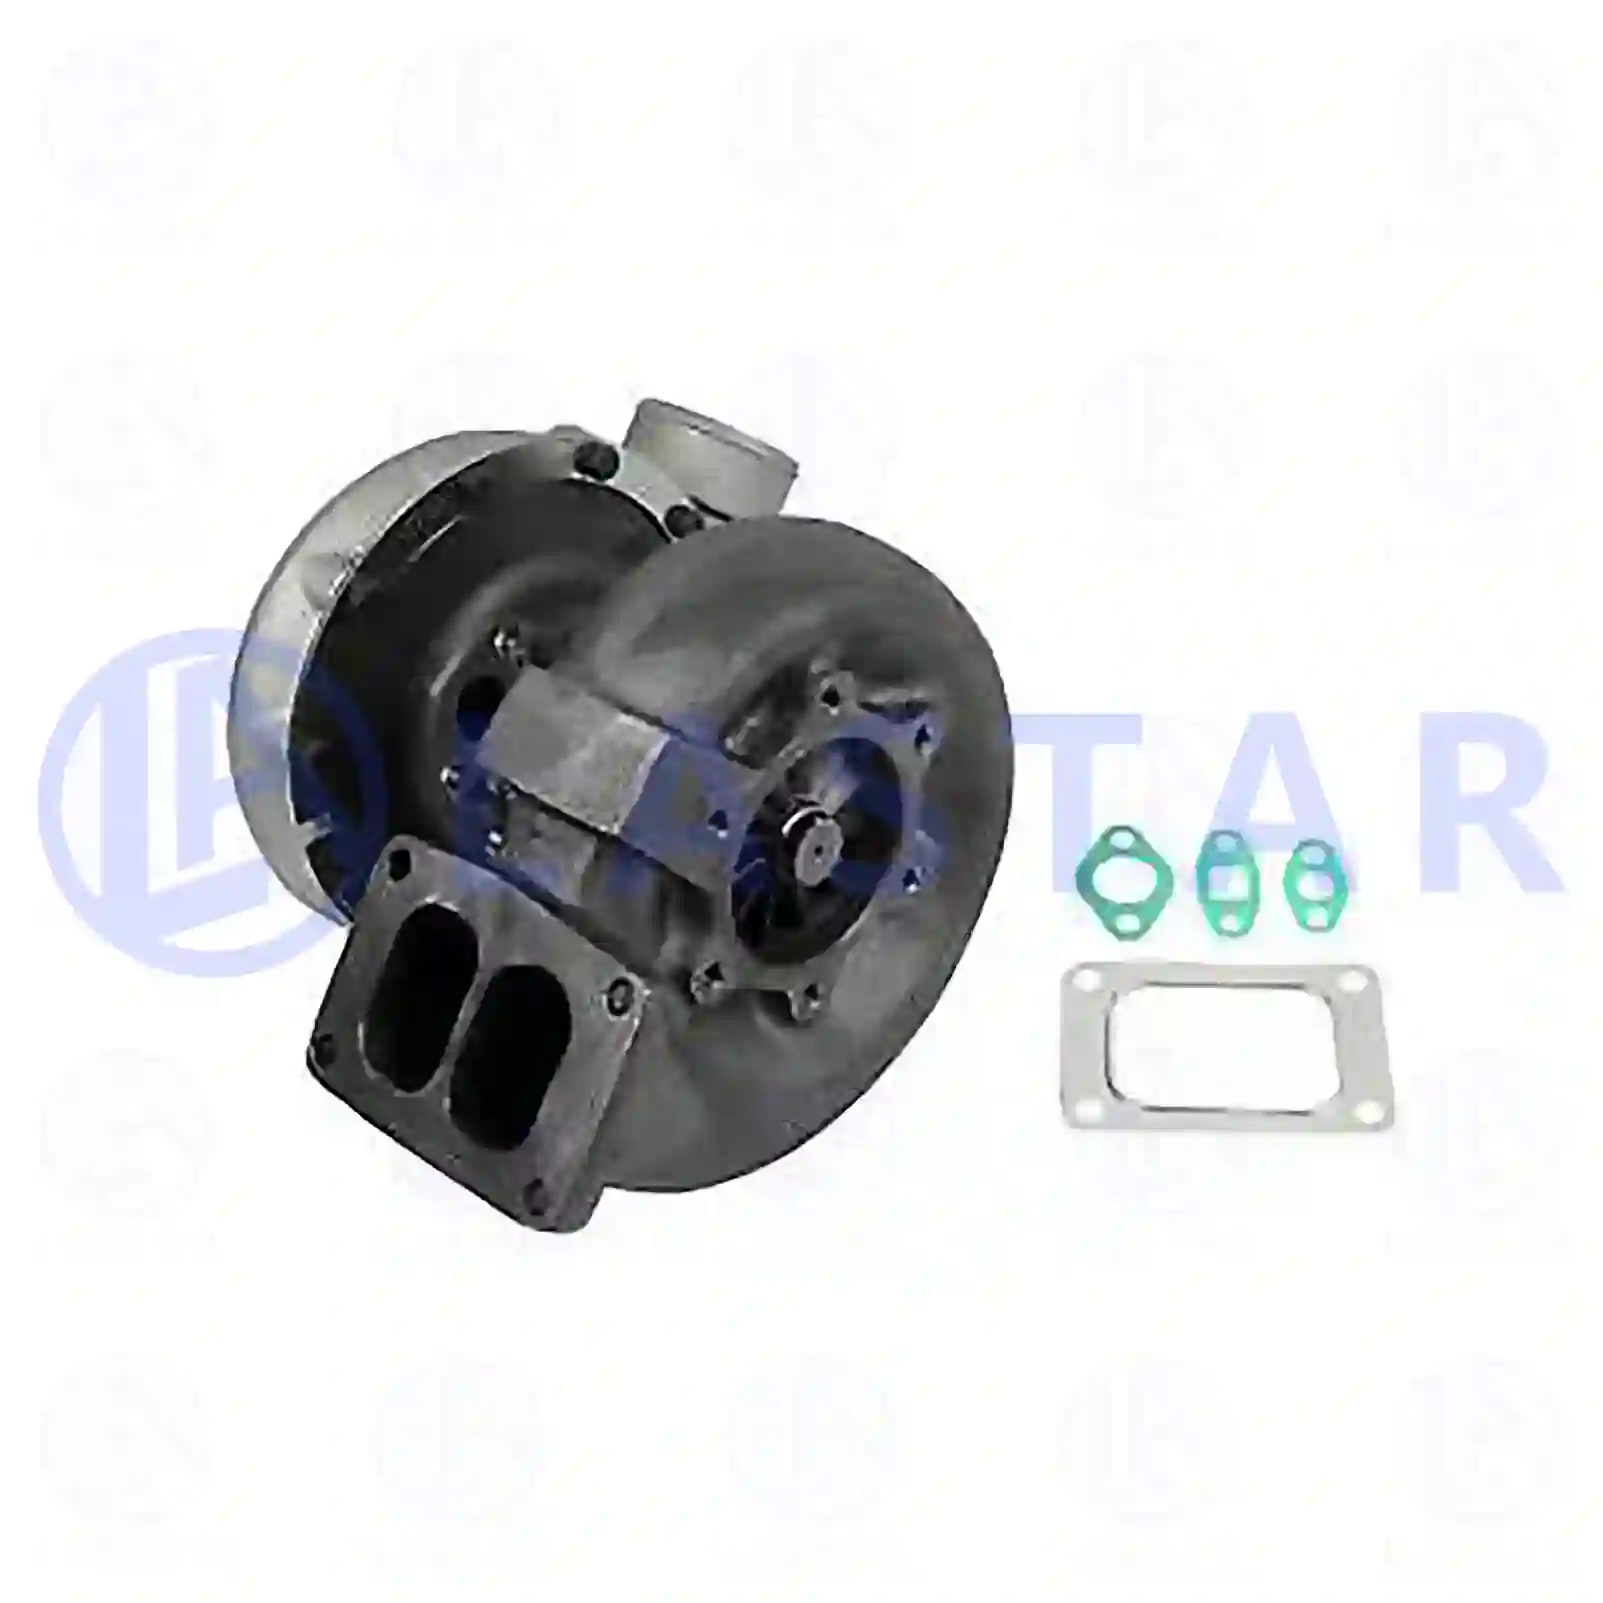 Turbocharger, with gasket kit, 77700374, 10570147, 10571555, 10571556, 10571566, 10571589, 10571590, 10571591, 1100371, 1317655, 1317661, 1317664, 1351127, 1362027, 1571556, 1571566, 1571589, 1571590, 1571591, 1571594, 349272, 358501, 370090, 378528, 392962, 393457, 570147, 570148, 571555, 571556, 571566, 571589, 571590, 571591, 571594 ||  77700374 Lastar Spare Part | Truck Spare Parts, Auotomotive Spare Parts Turbocharger, with gasket kit, 77700374, 10570147, 10571555, 10571556, 10571566, 10571589, 10571590, 10571591, 1100371, 1317655, 1317661, 1317664, 1351127, 1362027, 1571556, 1571566, 1571589, 1571590, 1571591, 1571594, 349272, 358501, 370090, 378528, 392962, 393457, 570147, 570148, 571555, 571556, 571566, 571589, 571590, 571591, 571594 ||  77700374 Lastar Spare Part | Truck Spare Parts, Auotomotive Spare Parts